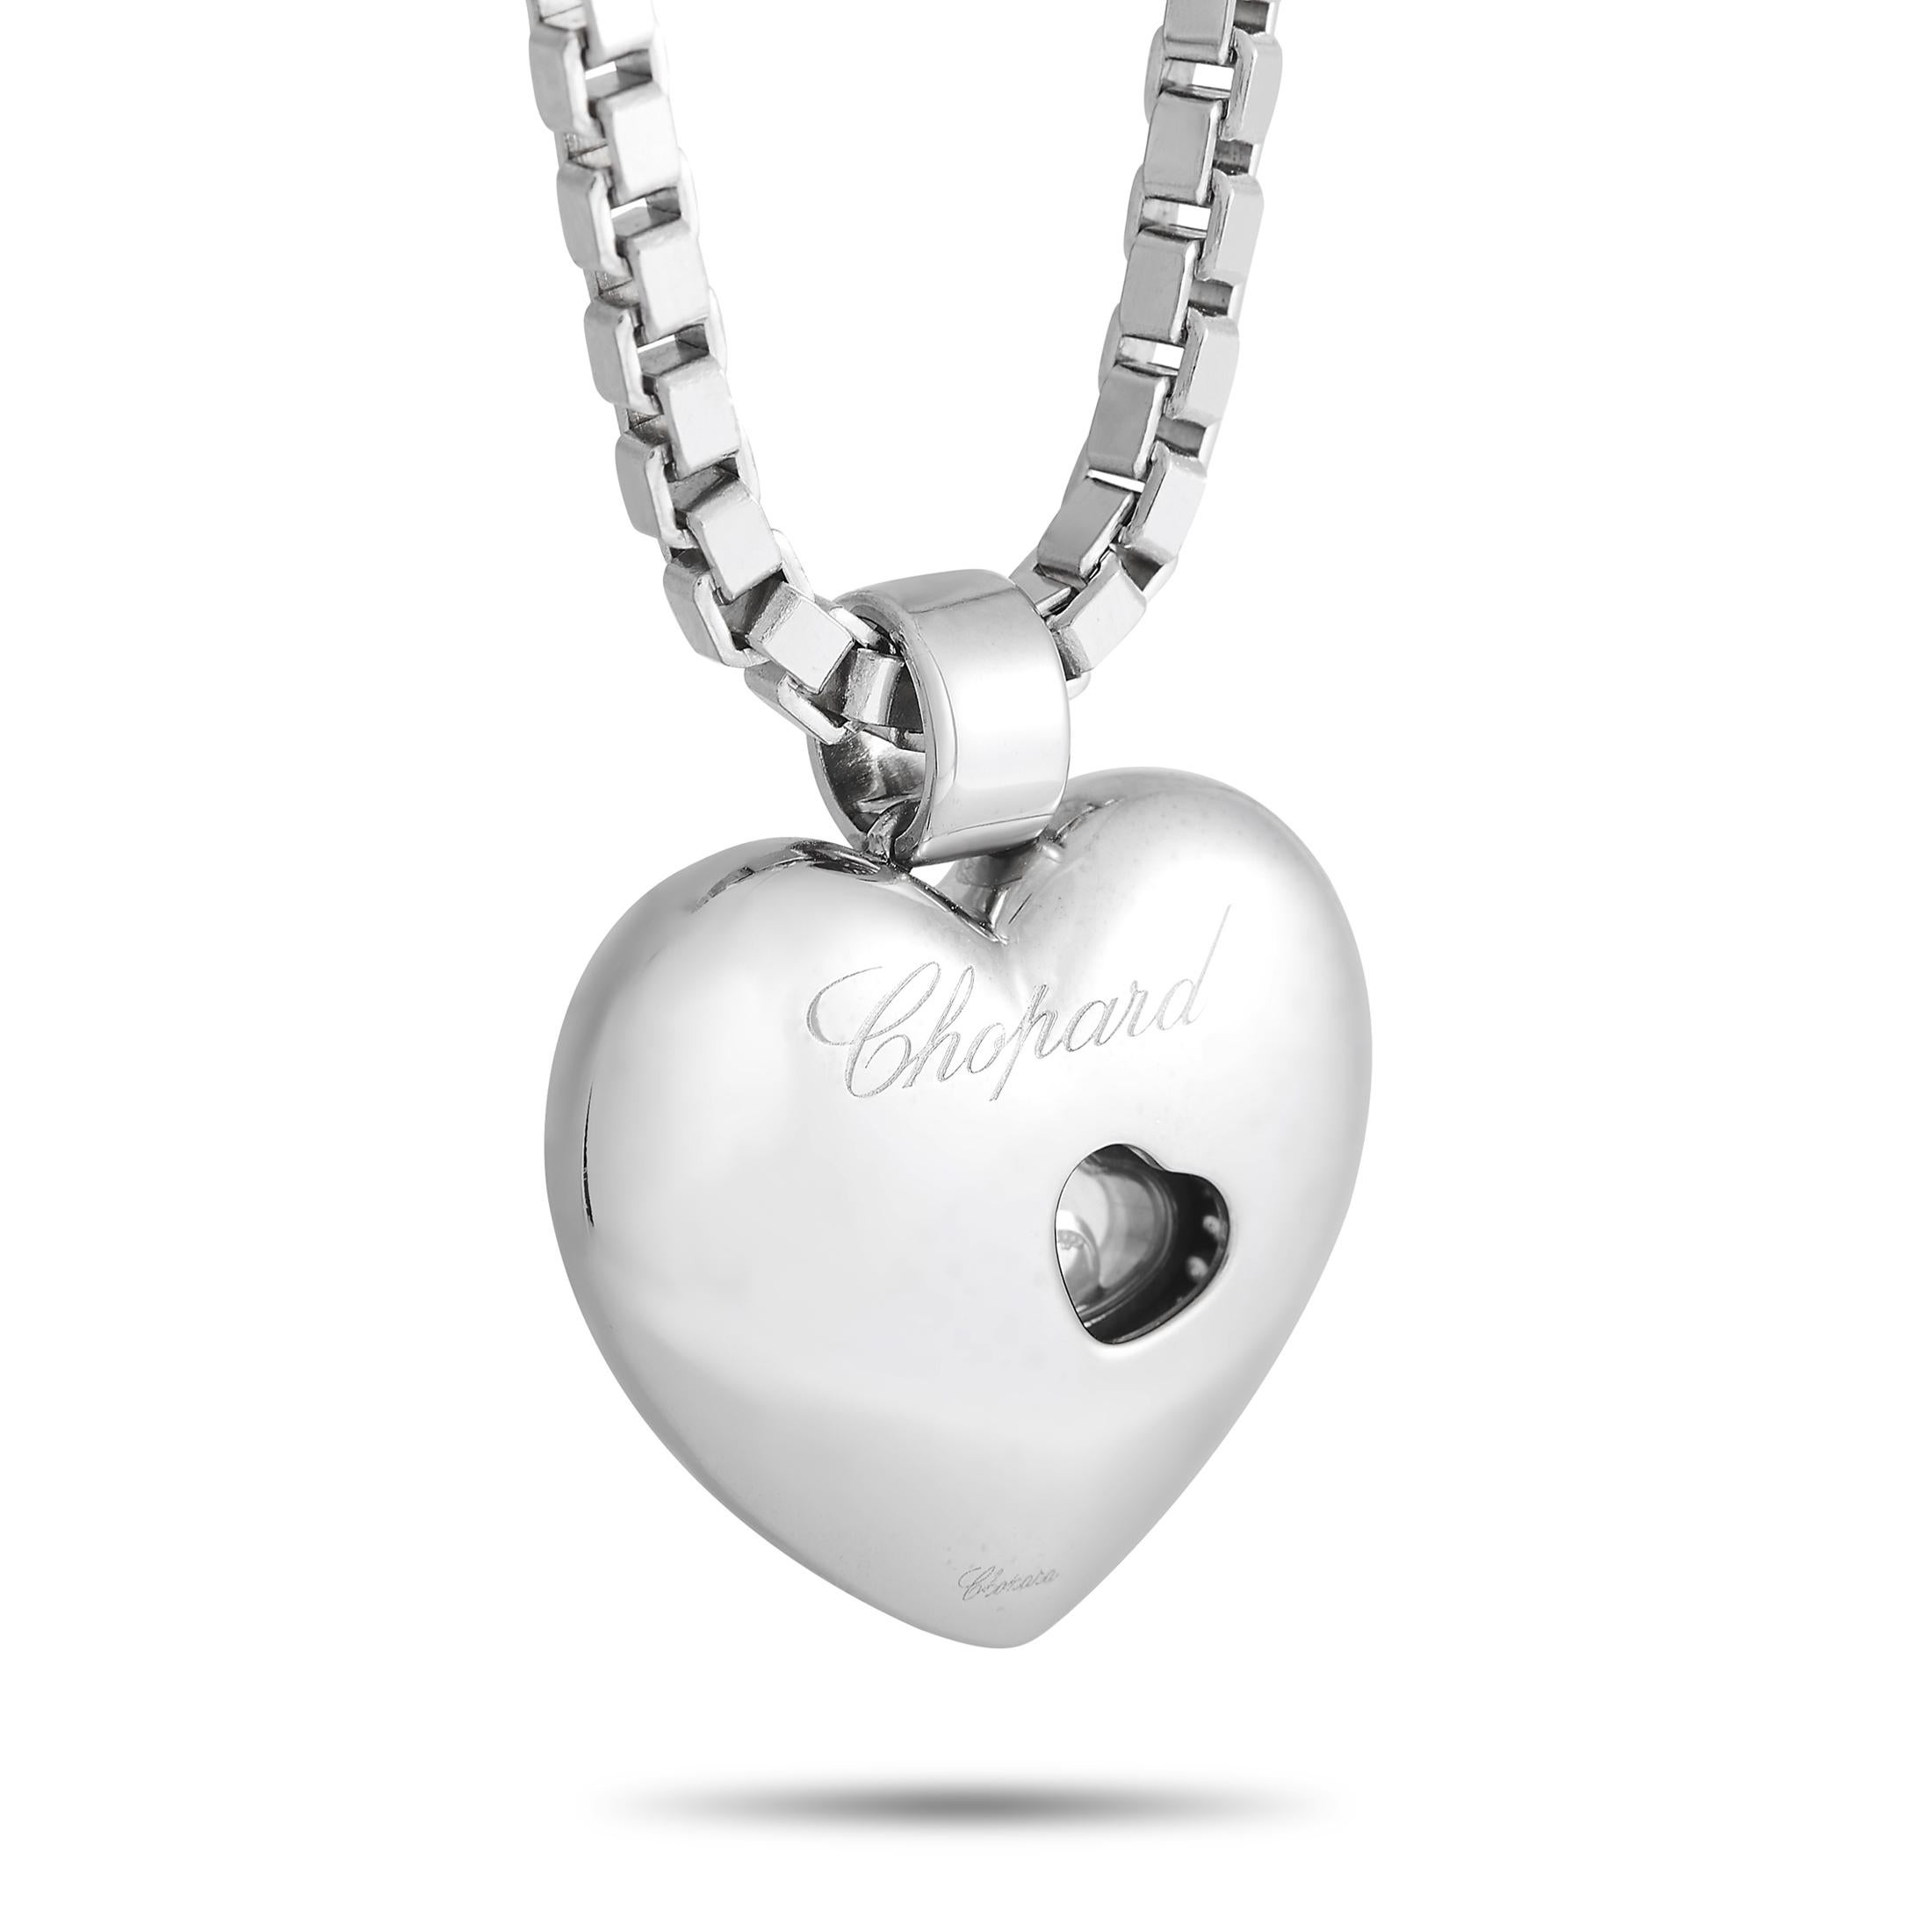 Express your love with this charming Chopard Happy Diamond necklace. Suspended from a sleek 16 chain, youll find an 18K White Gold heart-shaped pendant measuring 1.25 long by 1.0 wide. It comes to life thanks to bold letters and a floating diamond